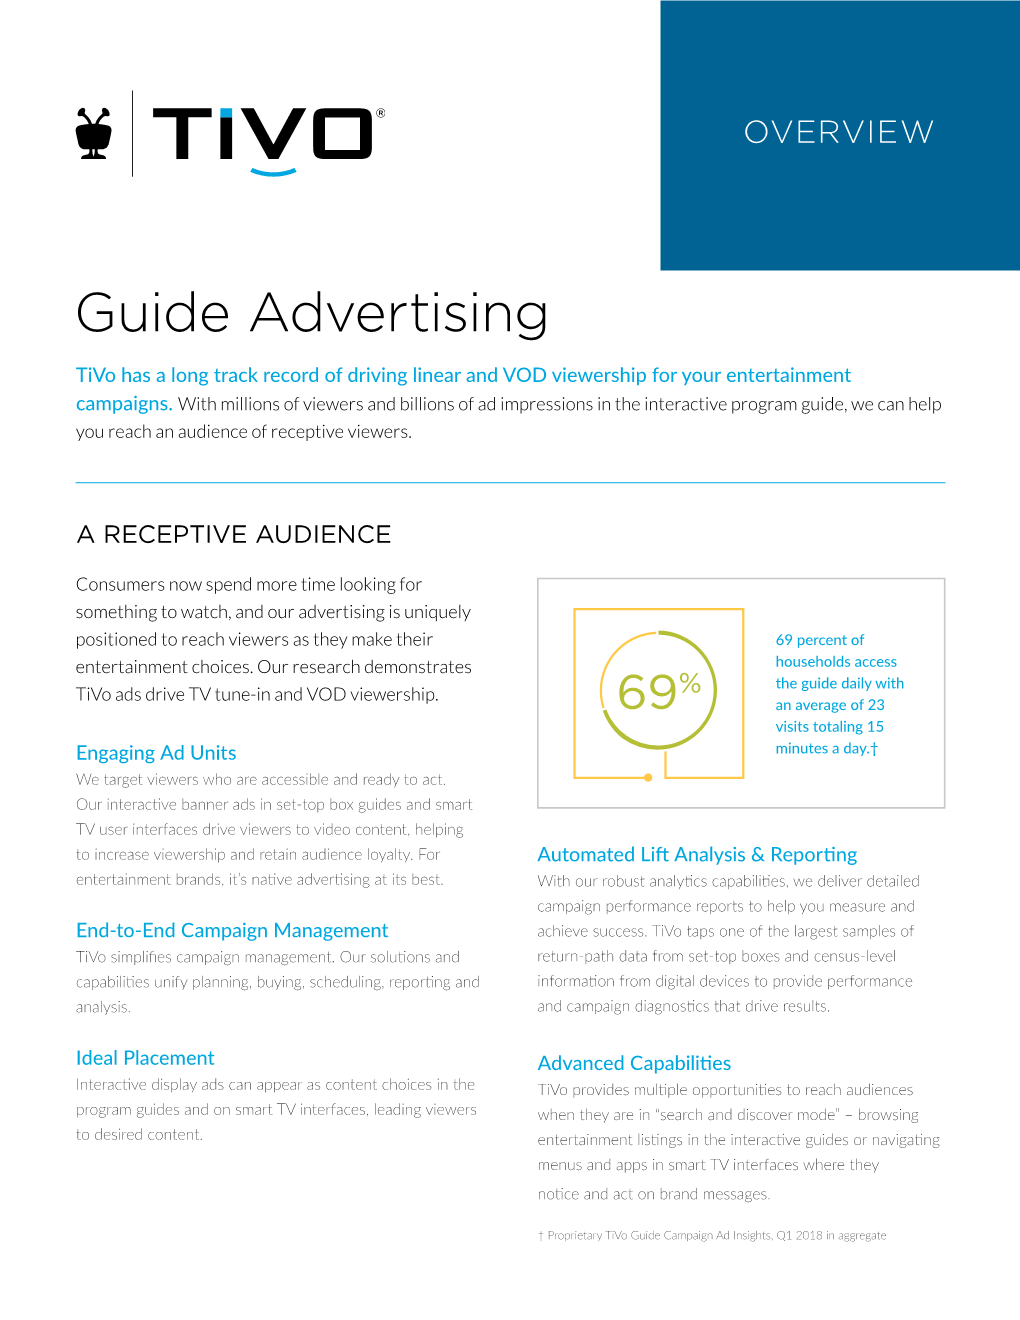 Guide Advertising Overview